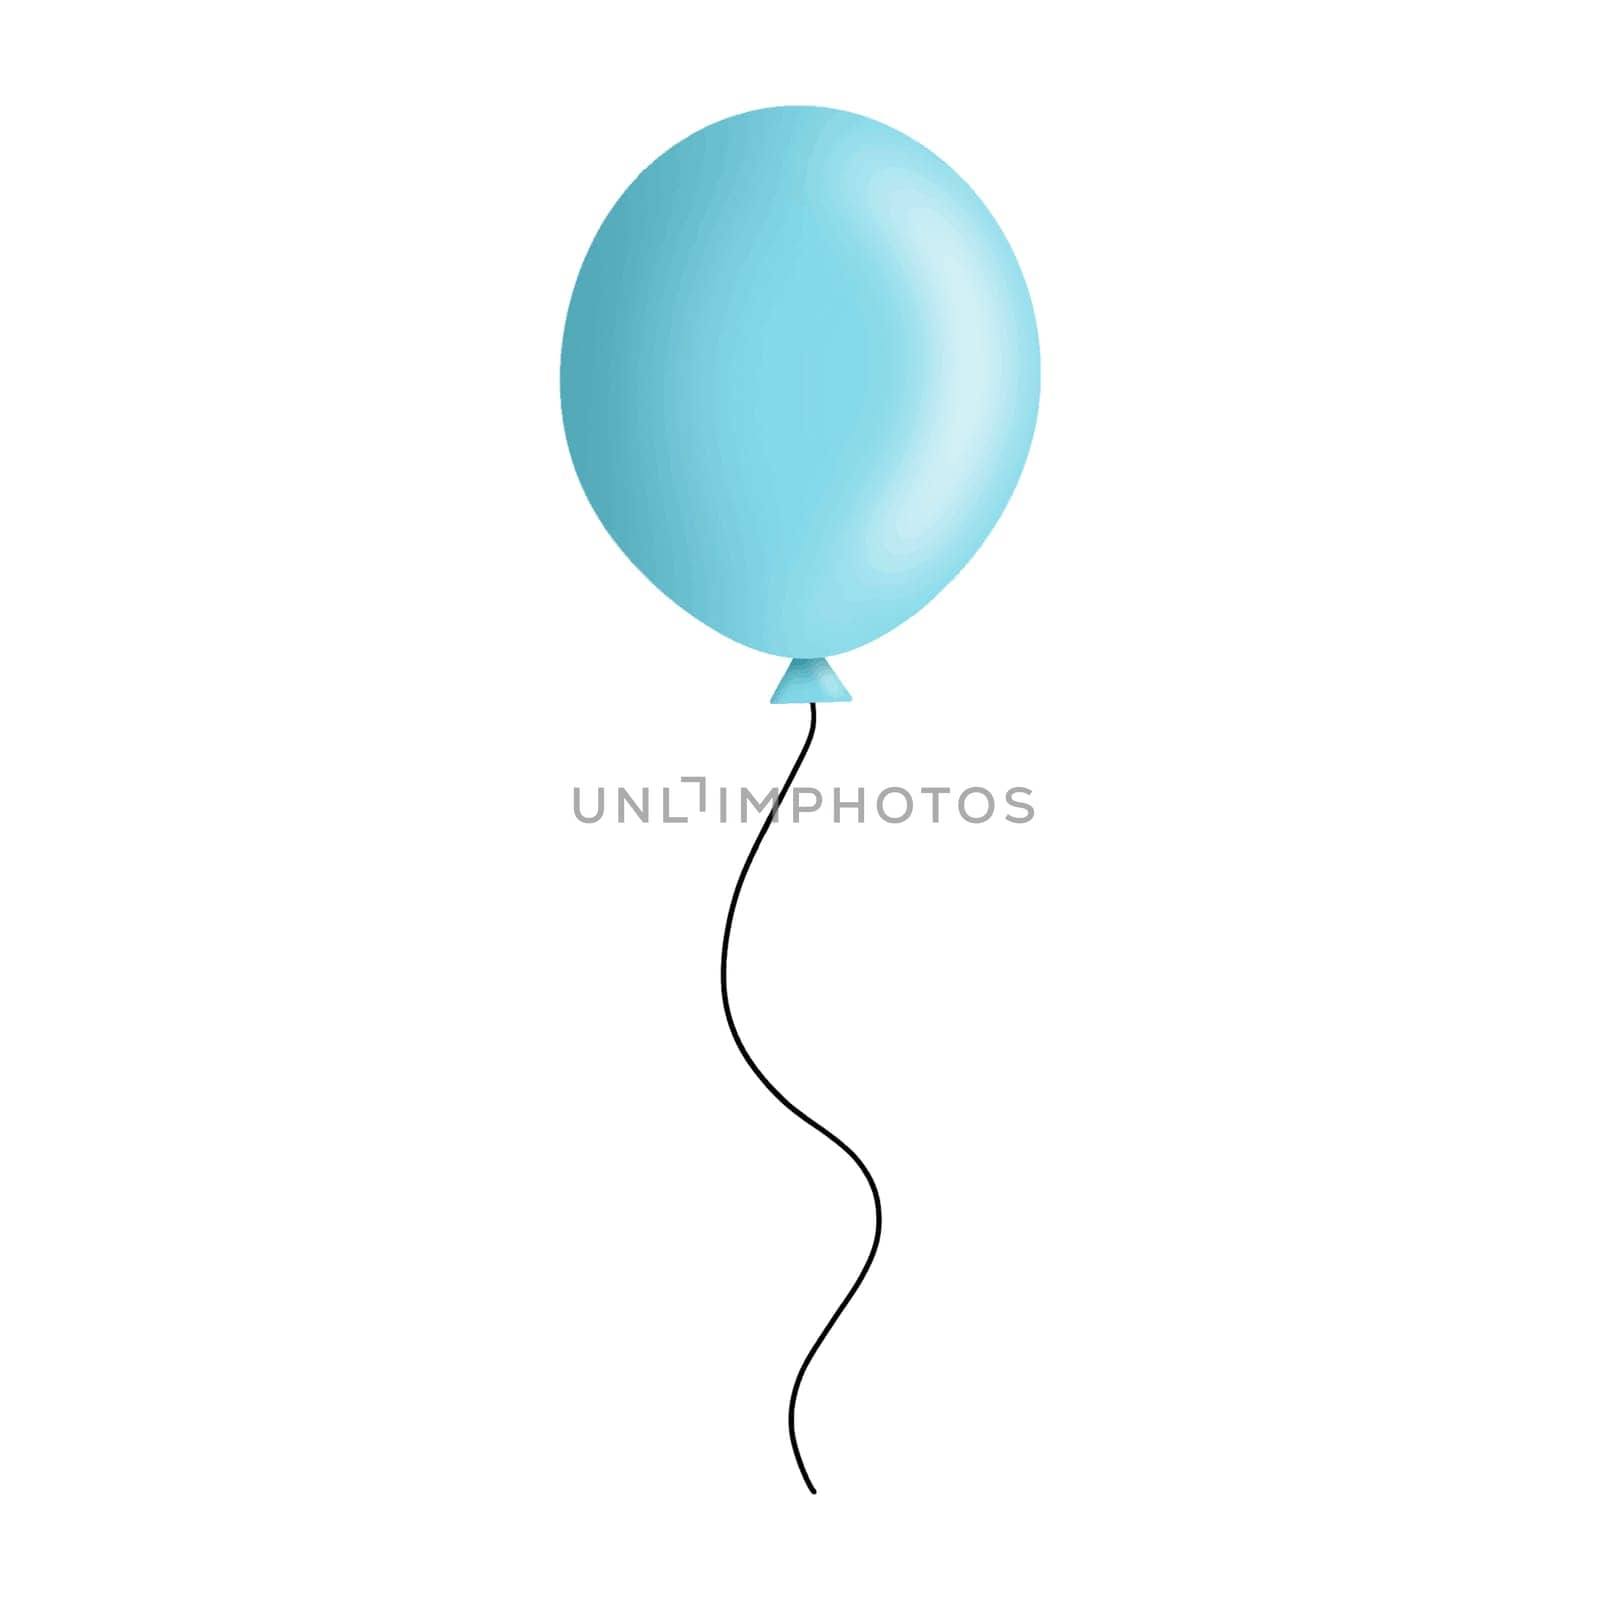 Blue Balloon party illustration isolated Clipart. Blue Balloon Party Clipart  for celebration design, planner sticker, pattern, background, invitations, greeting cards, sublimation. by Skyecreativestudio